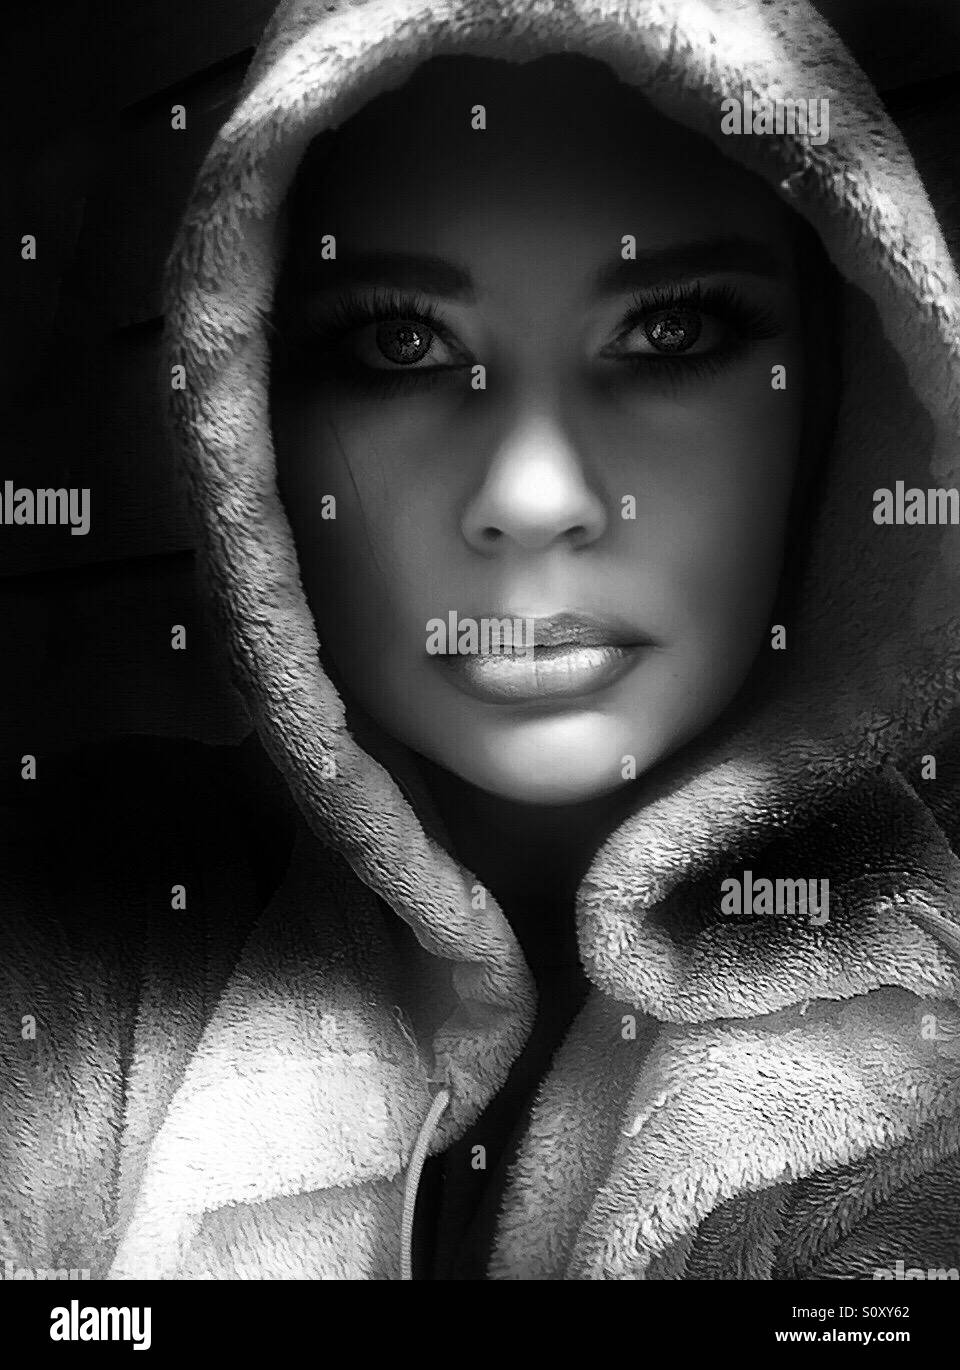 Black and white portrait of hooded woman Stock Photo